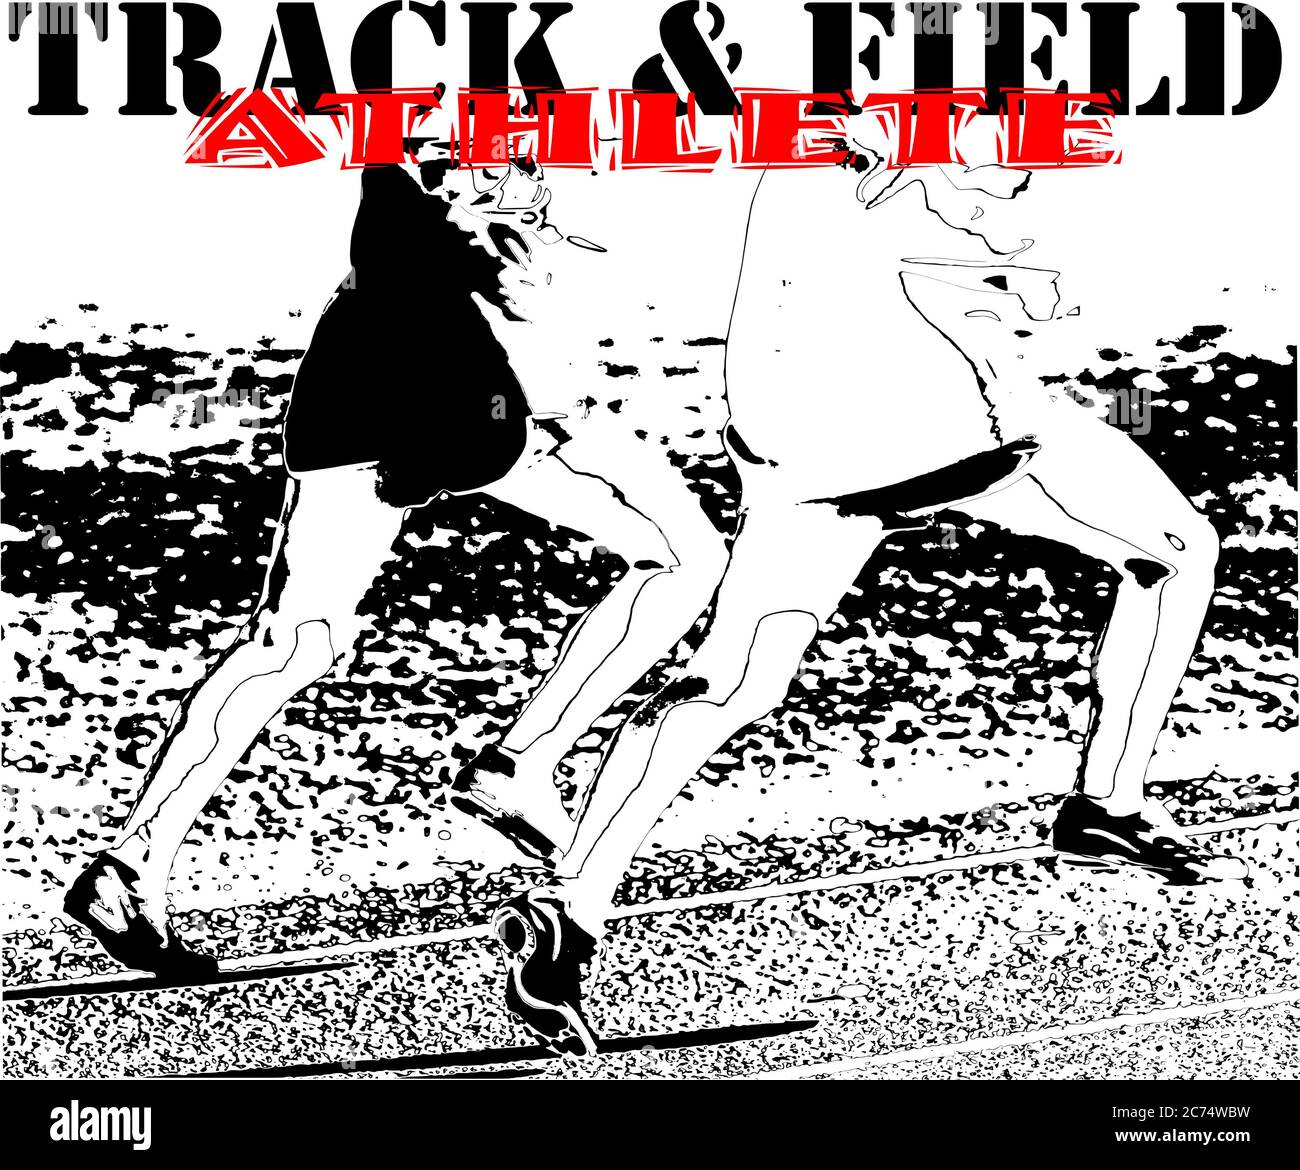 Two runners on a track with the text Track and Field Athlete written above them. Stock Photo